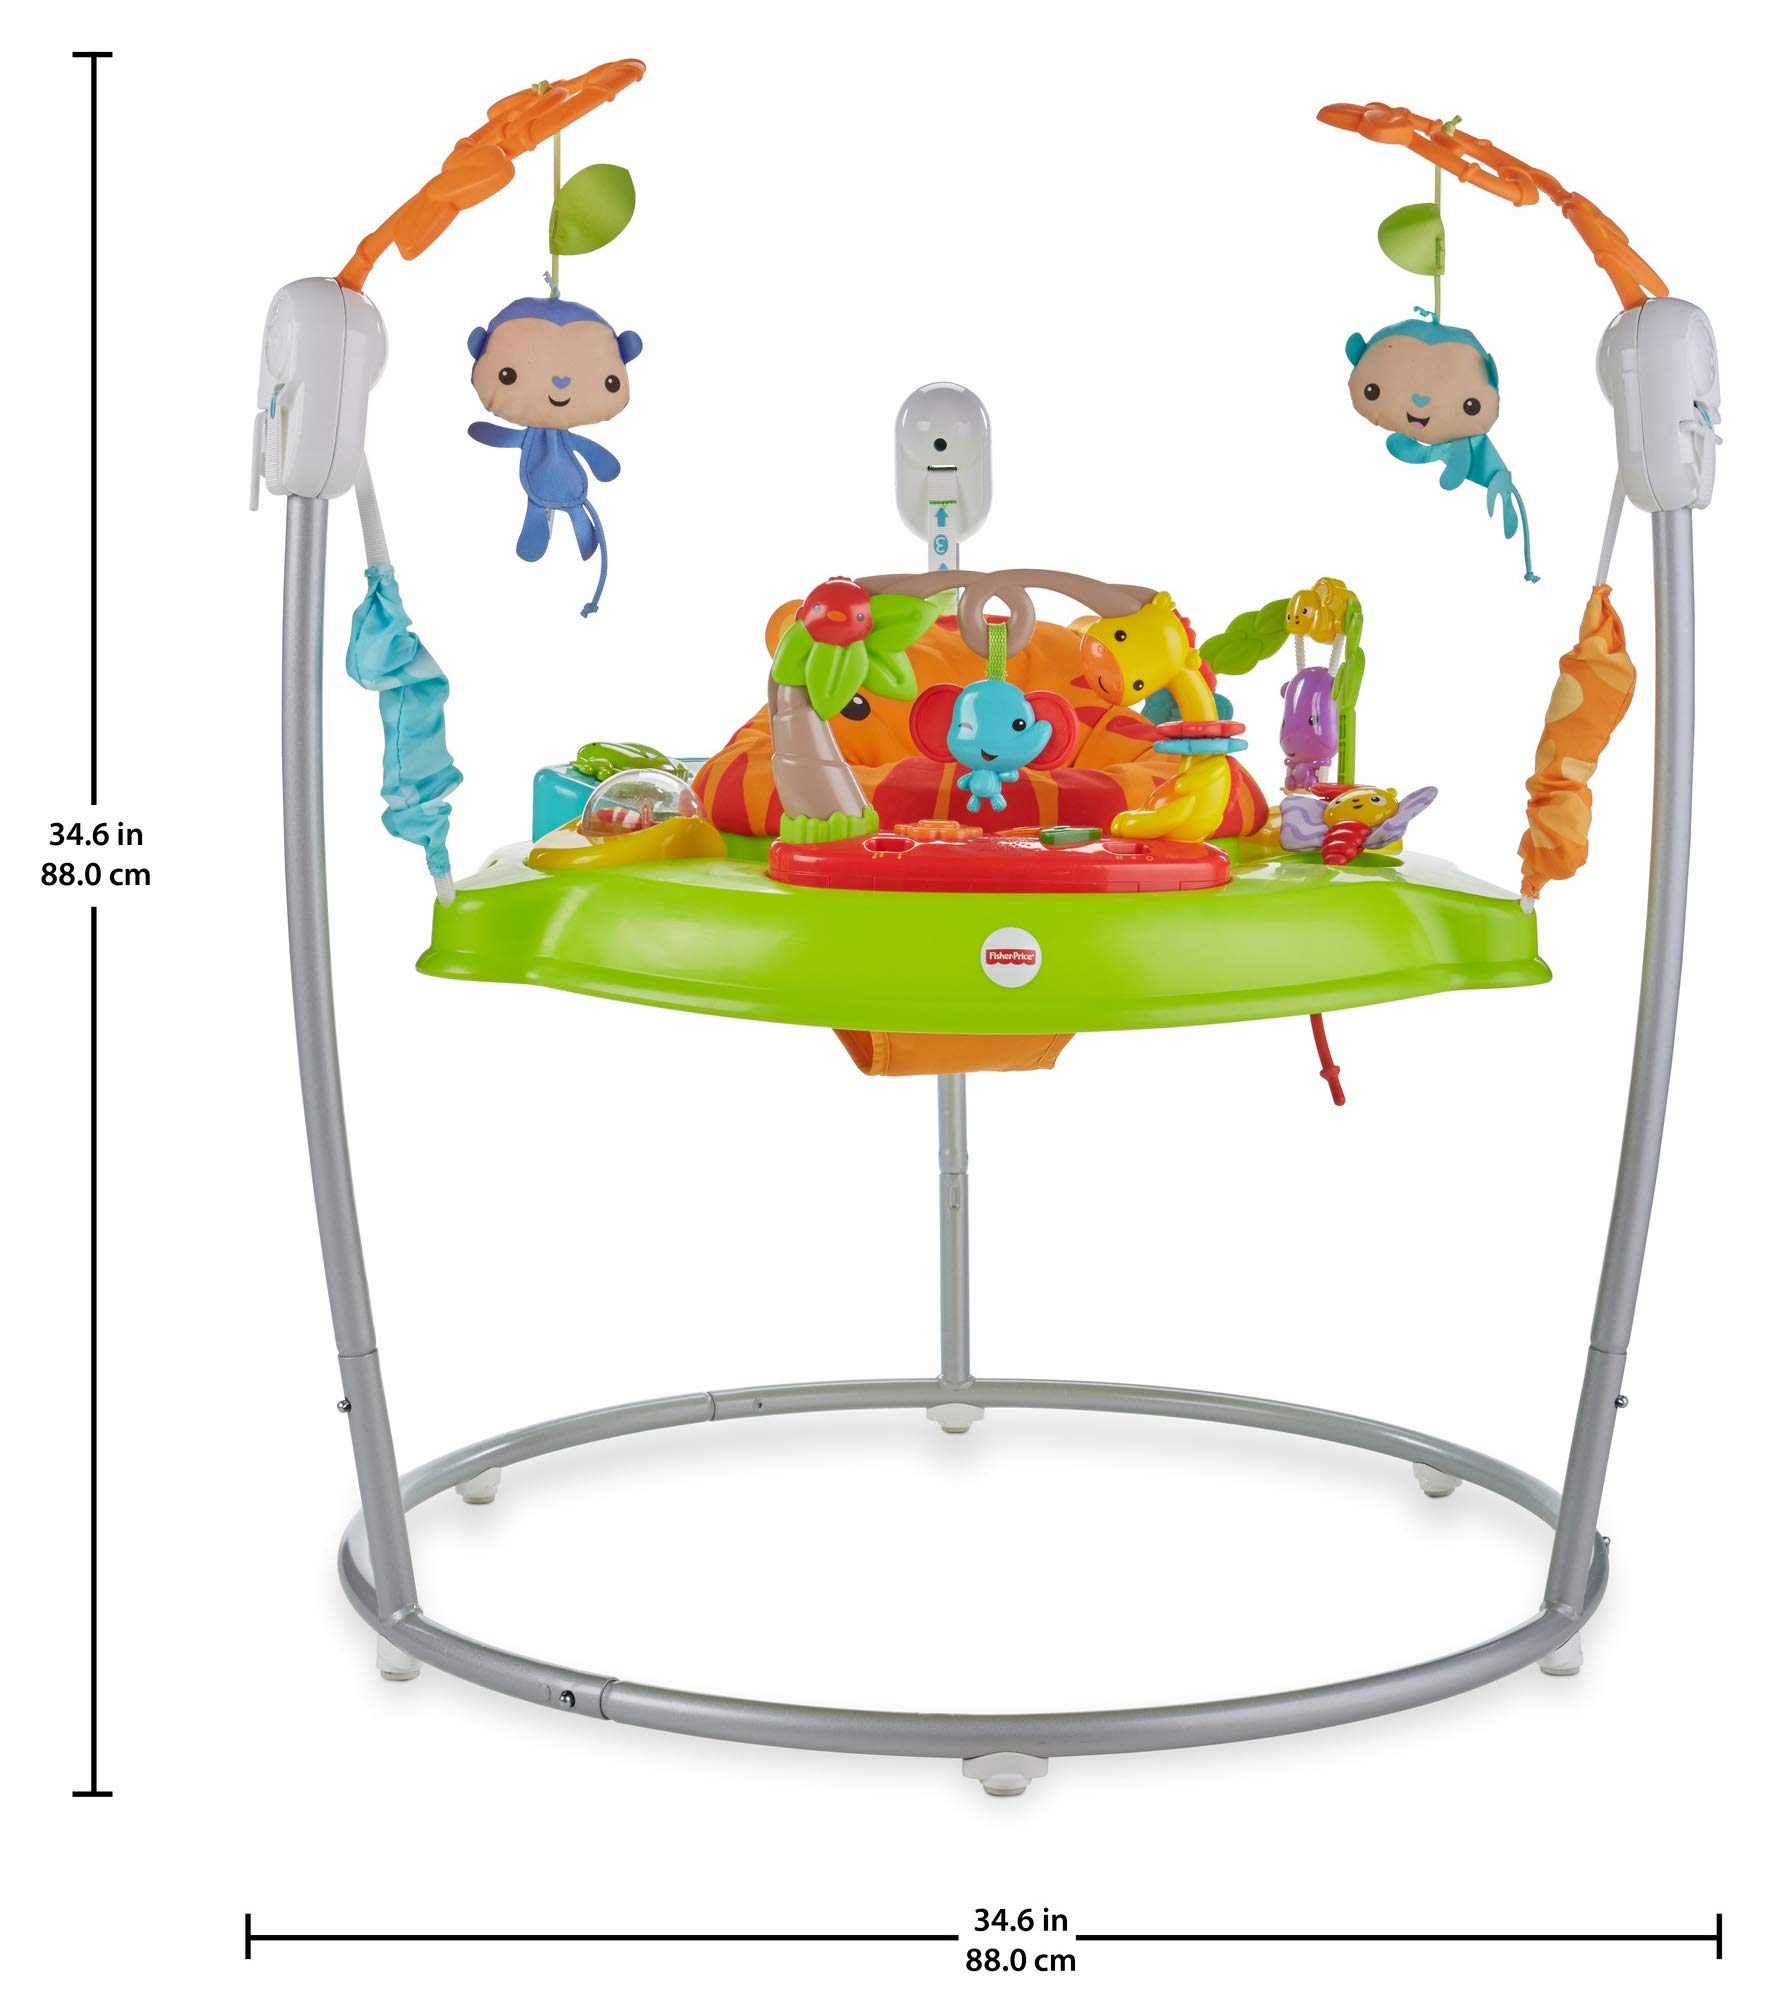 Fisher-Price Tiger Time Jumperoo, Infant Activity Center with Music, Lights, Sounds, and Early Learning